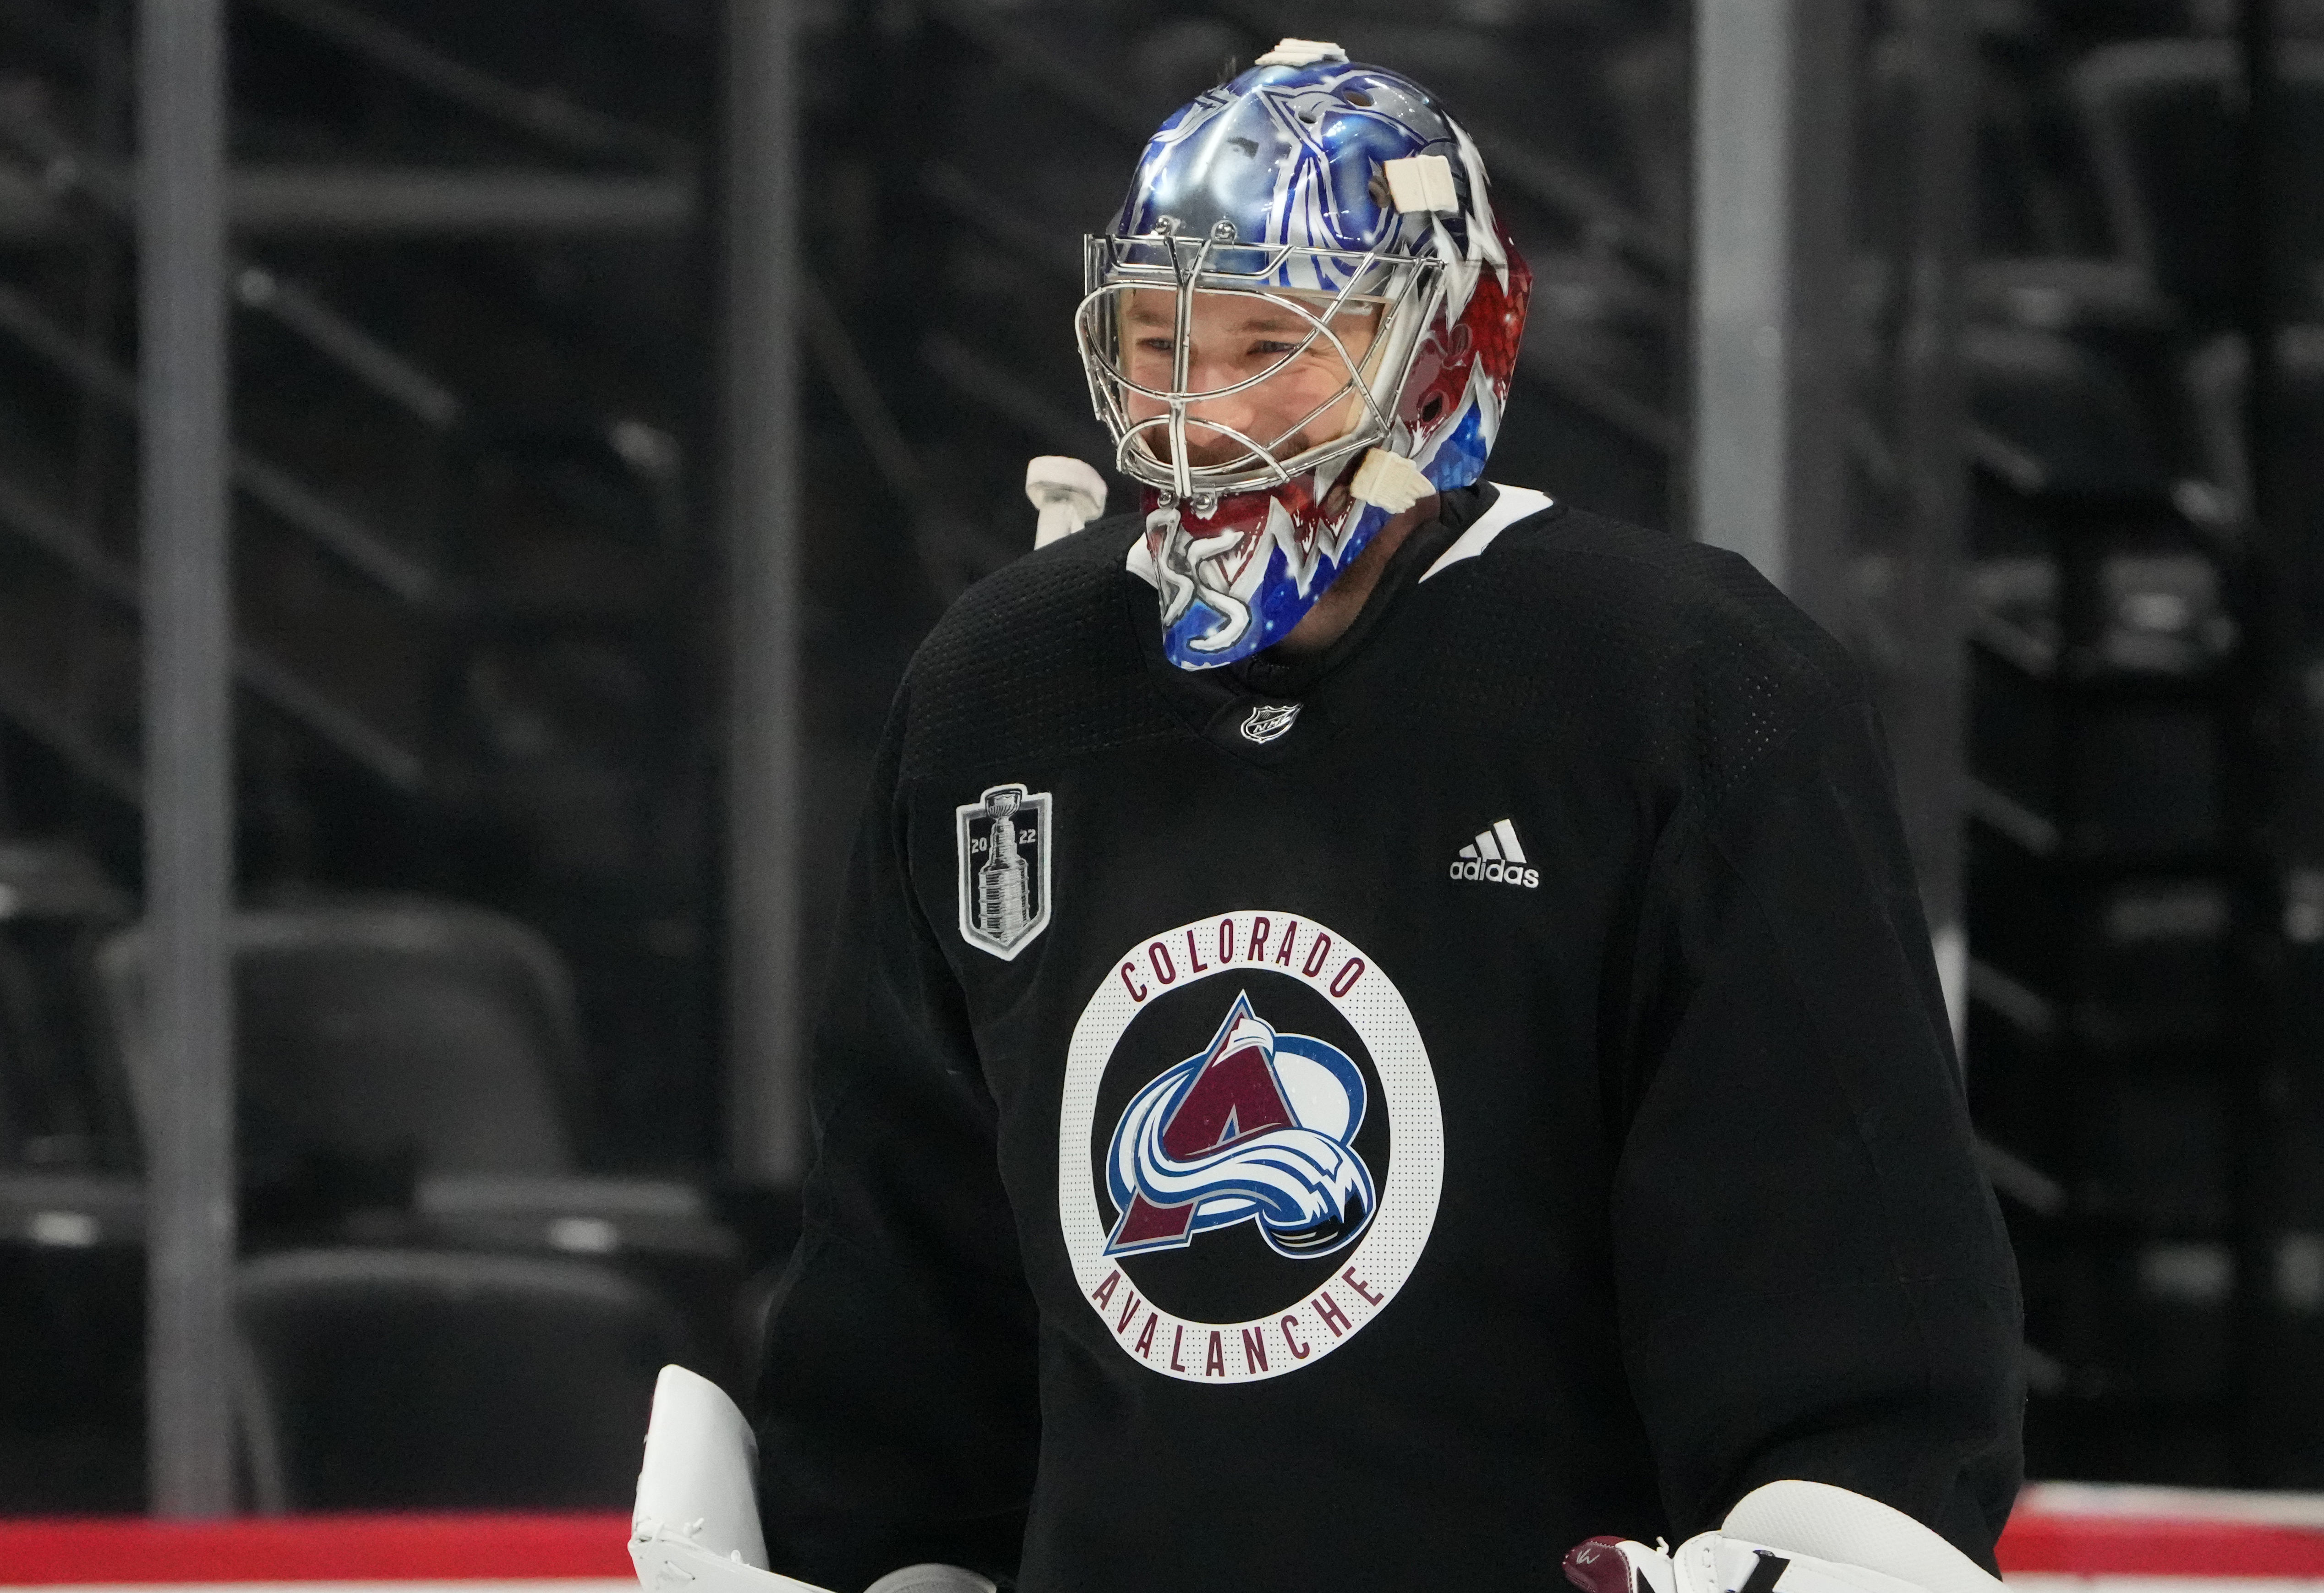 Avalanche net belongs to Darcy Kuemper in Stanley Cup Final